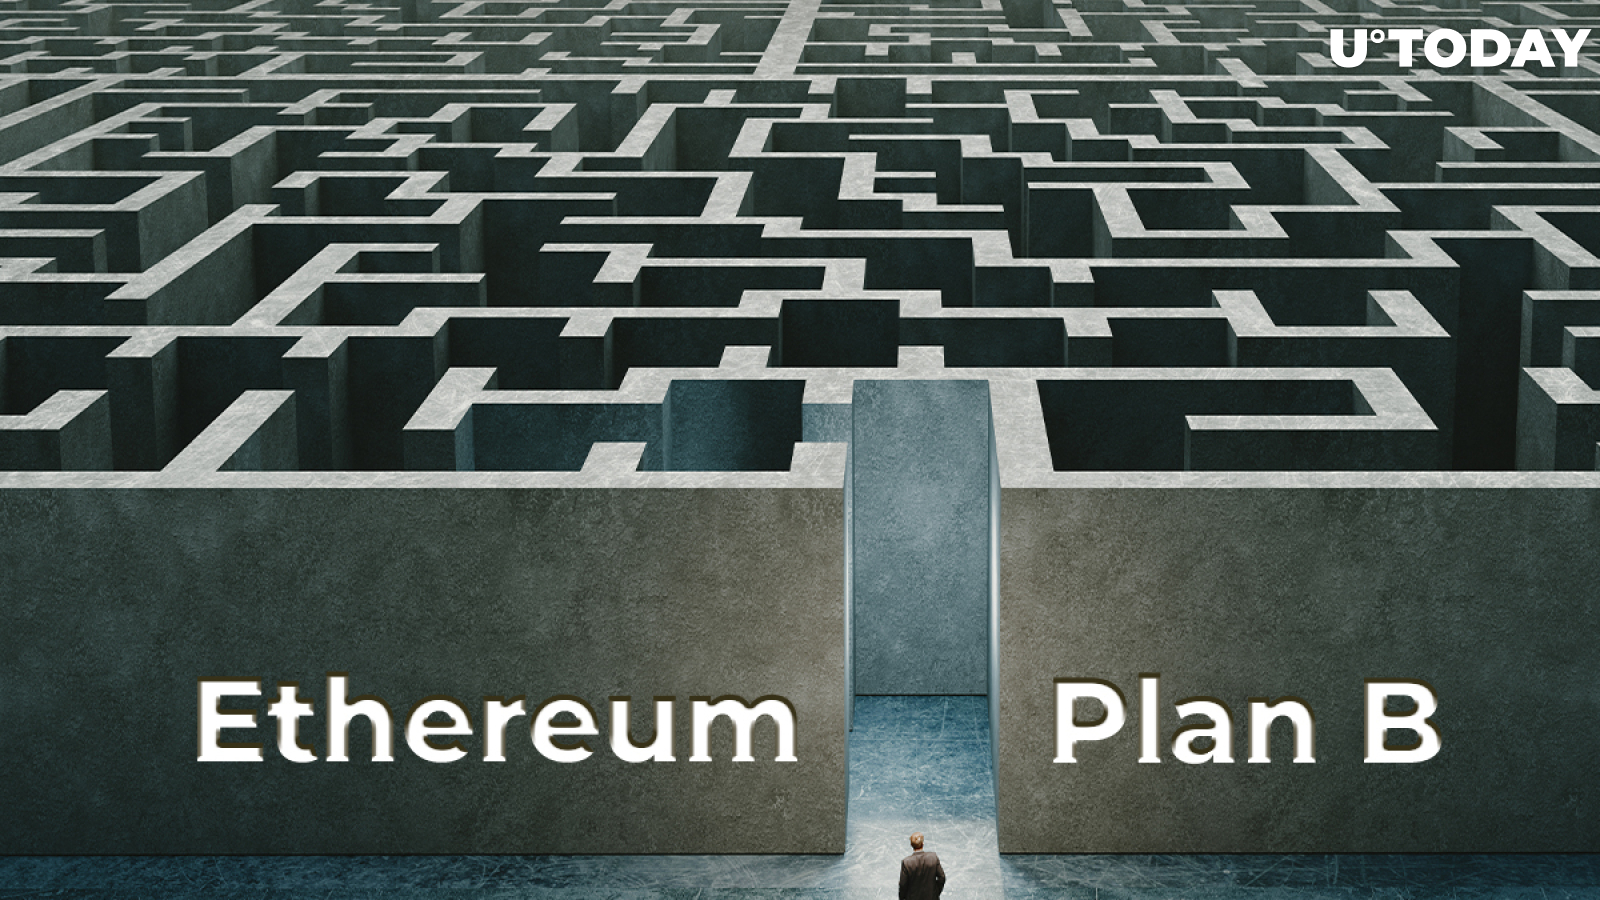 Ethereum Can Have Value for Its Utility, Not Scarcity, Plan B Analyst Claims